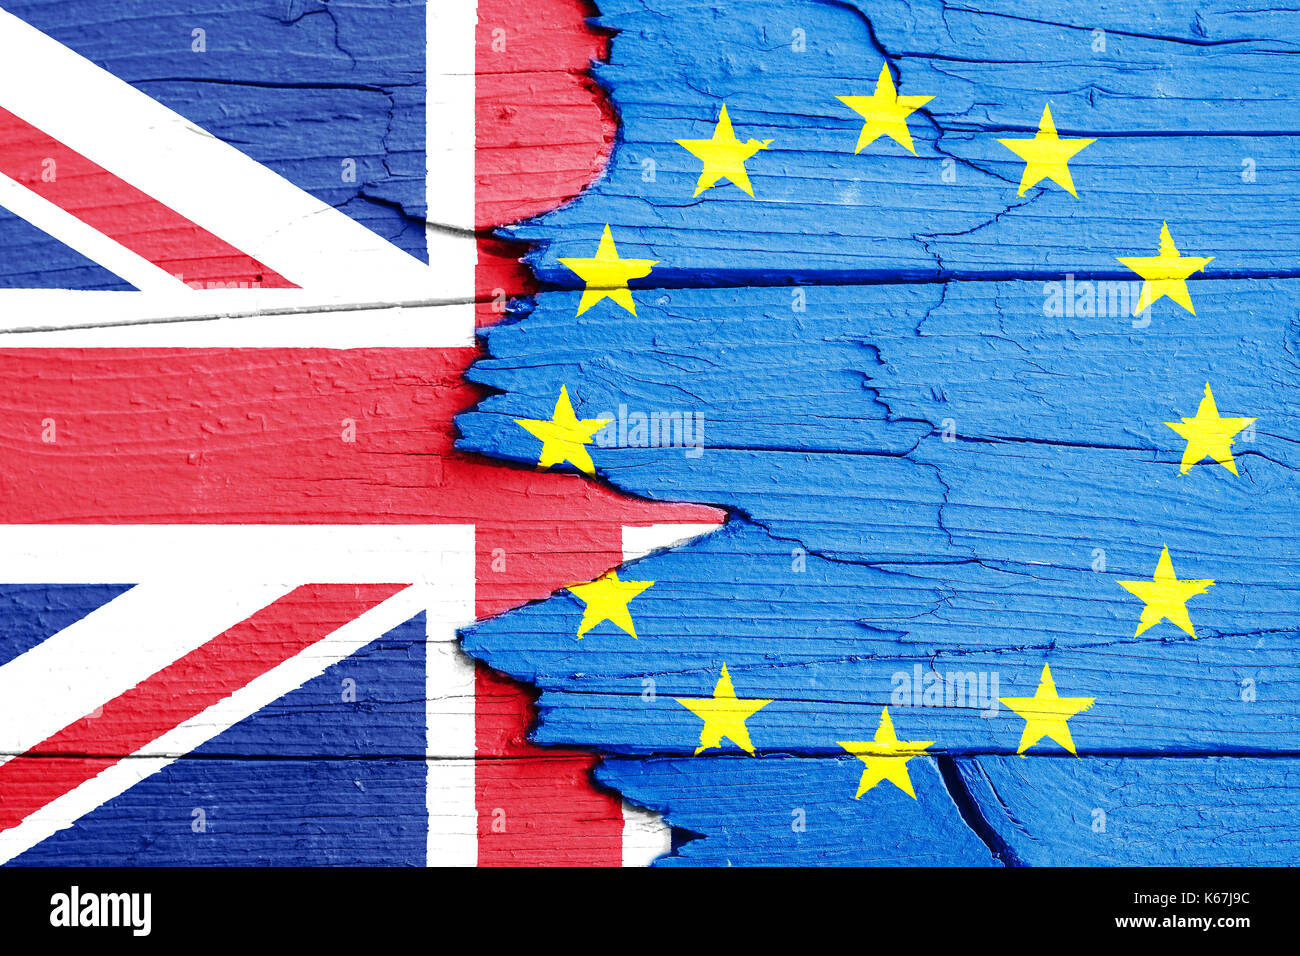 Brexit concept image: flags of the European Union (EU) and United Kingdom (UK) painted on a cracked broken wooden wall. Stock Photo